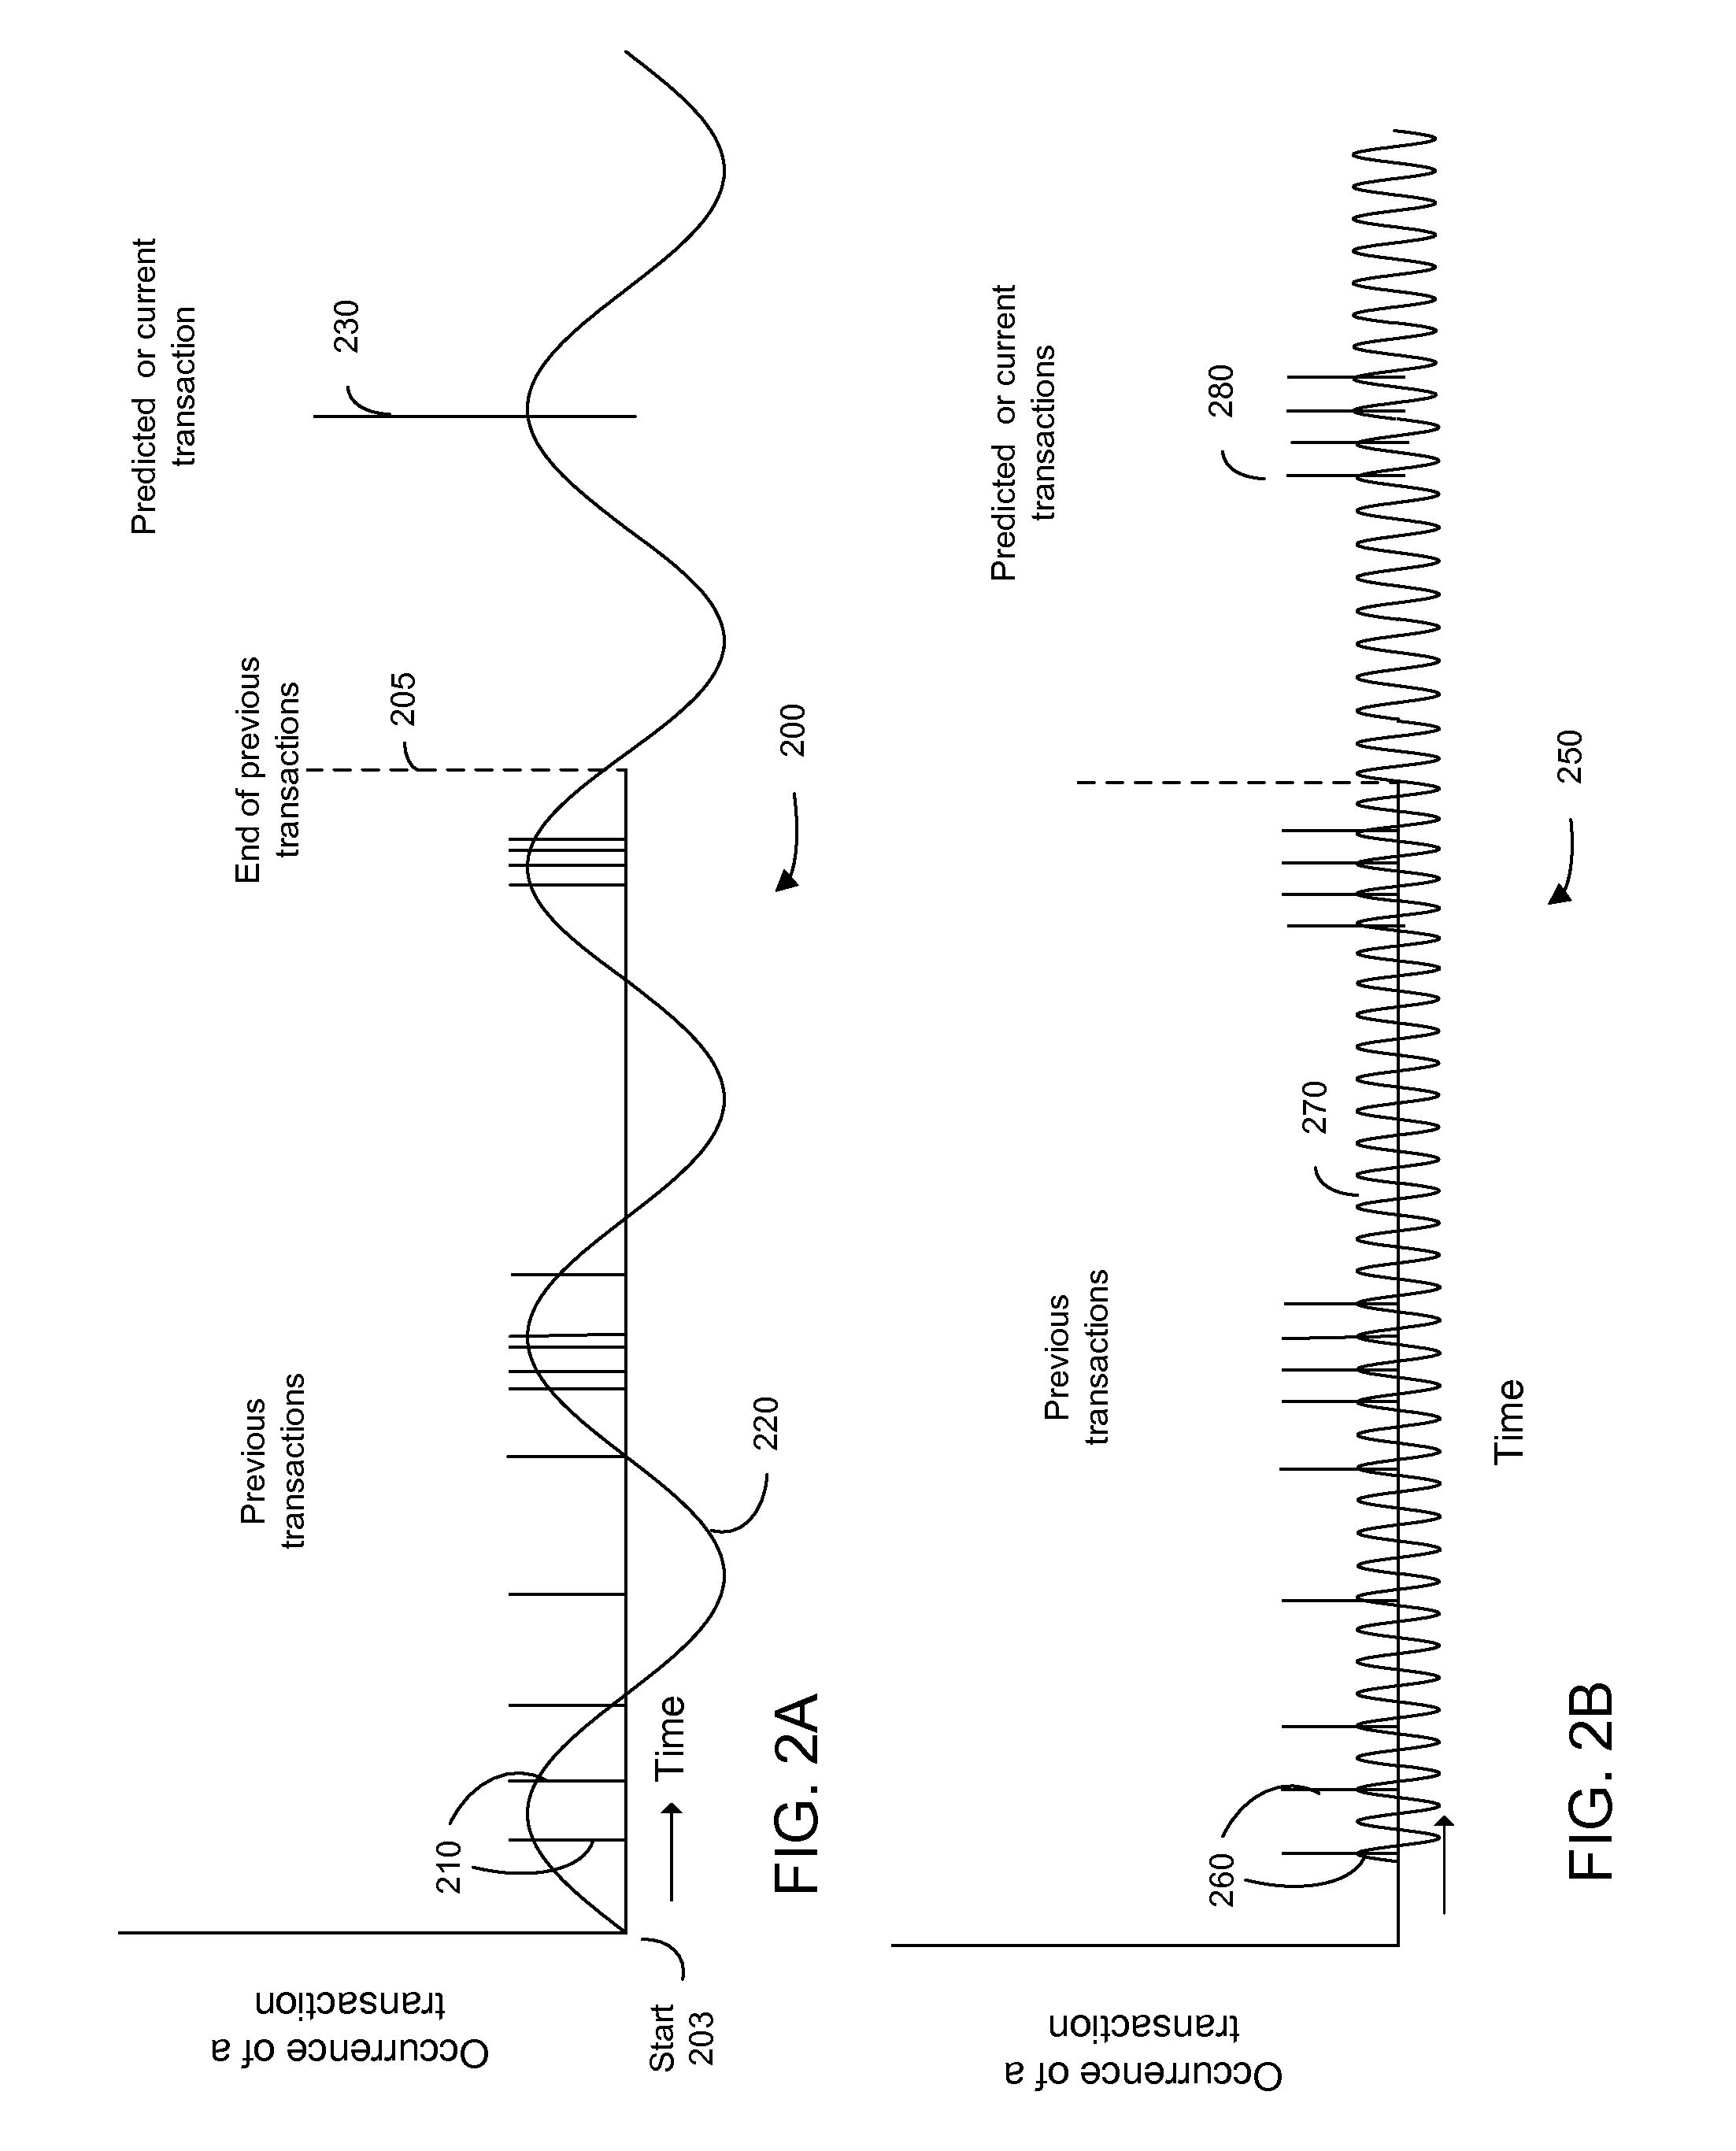 Frequency-based transaction prediction and processing